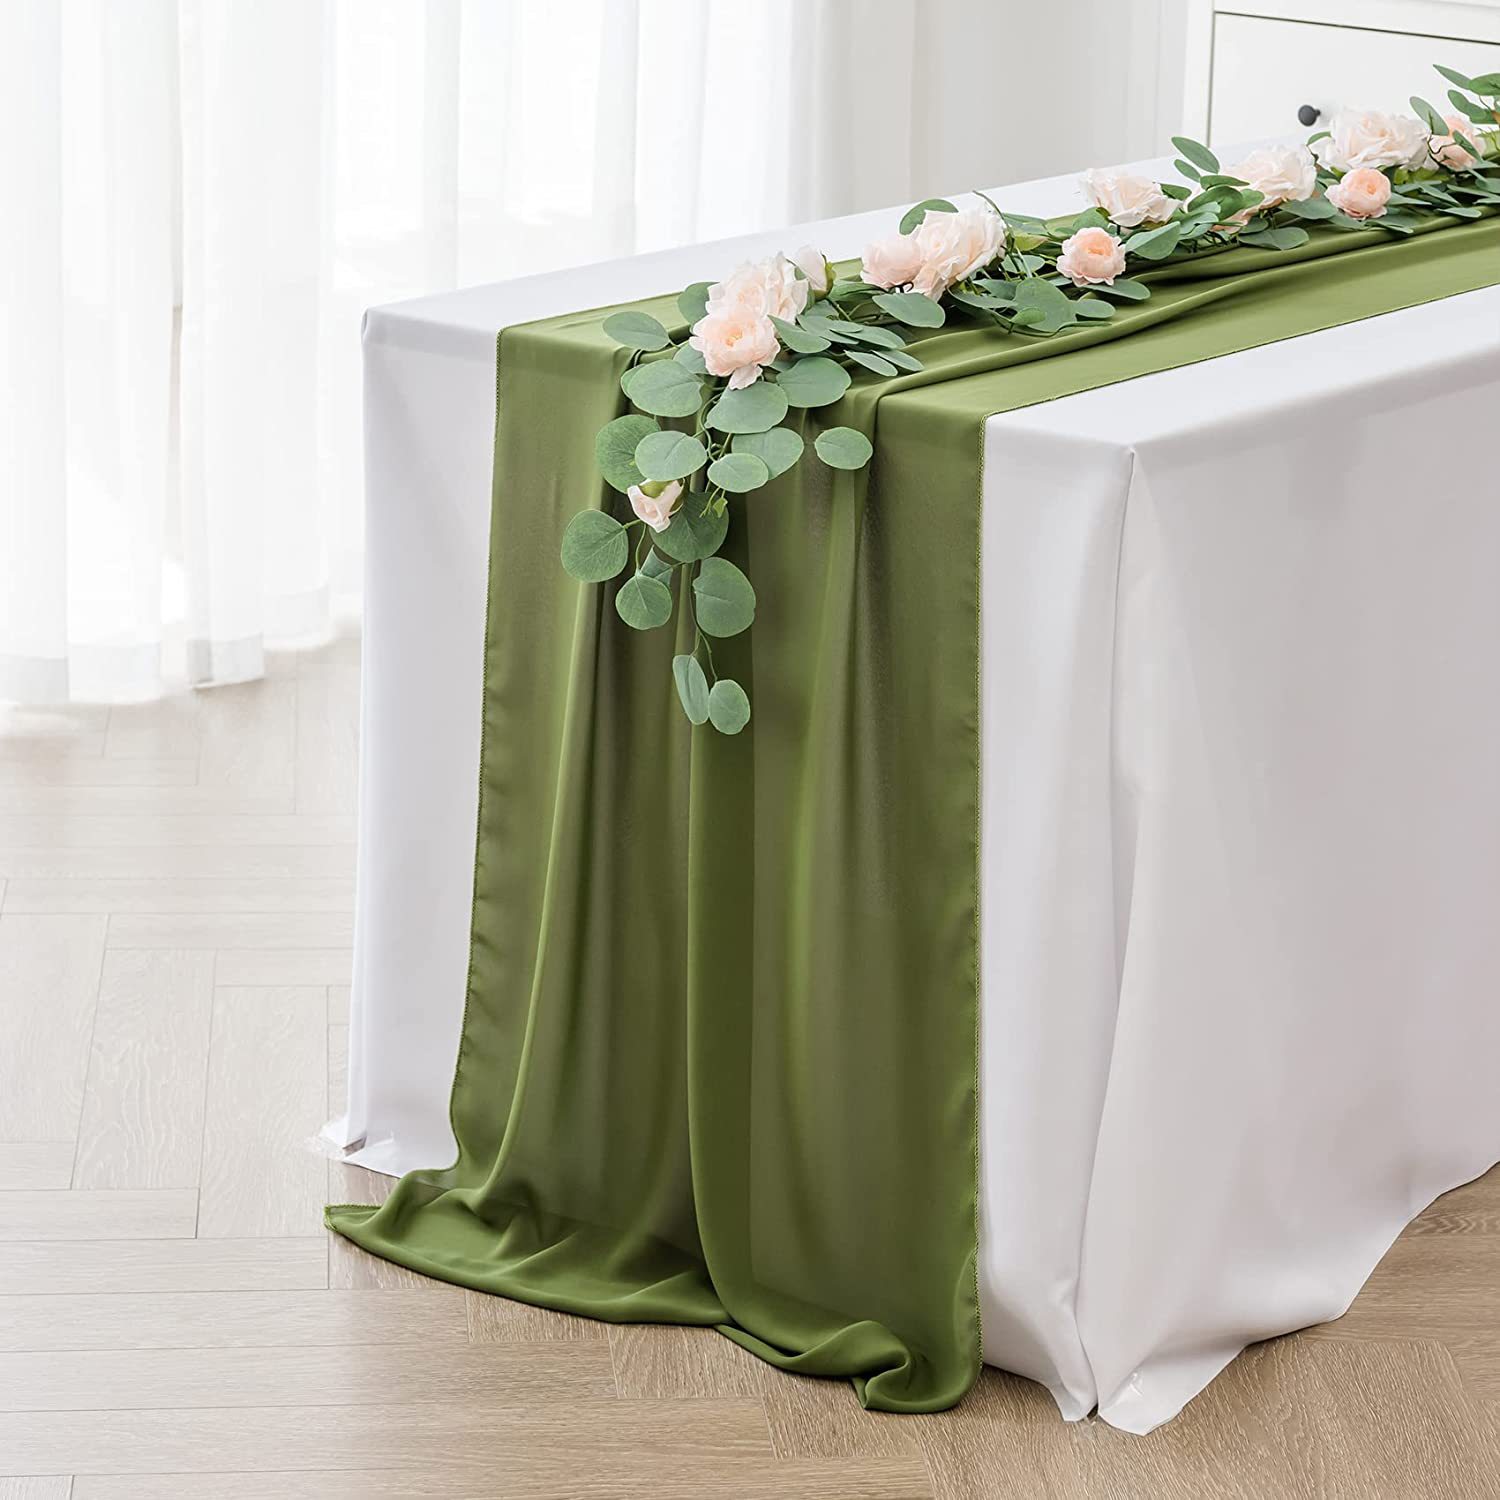 Olive green chiffon table runners for wedding bridal baby shower birthday party table decoration DSTR02